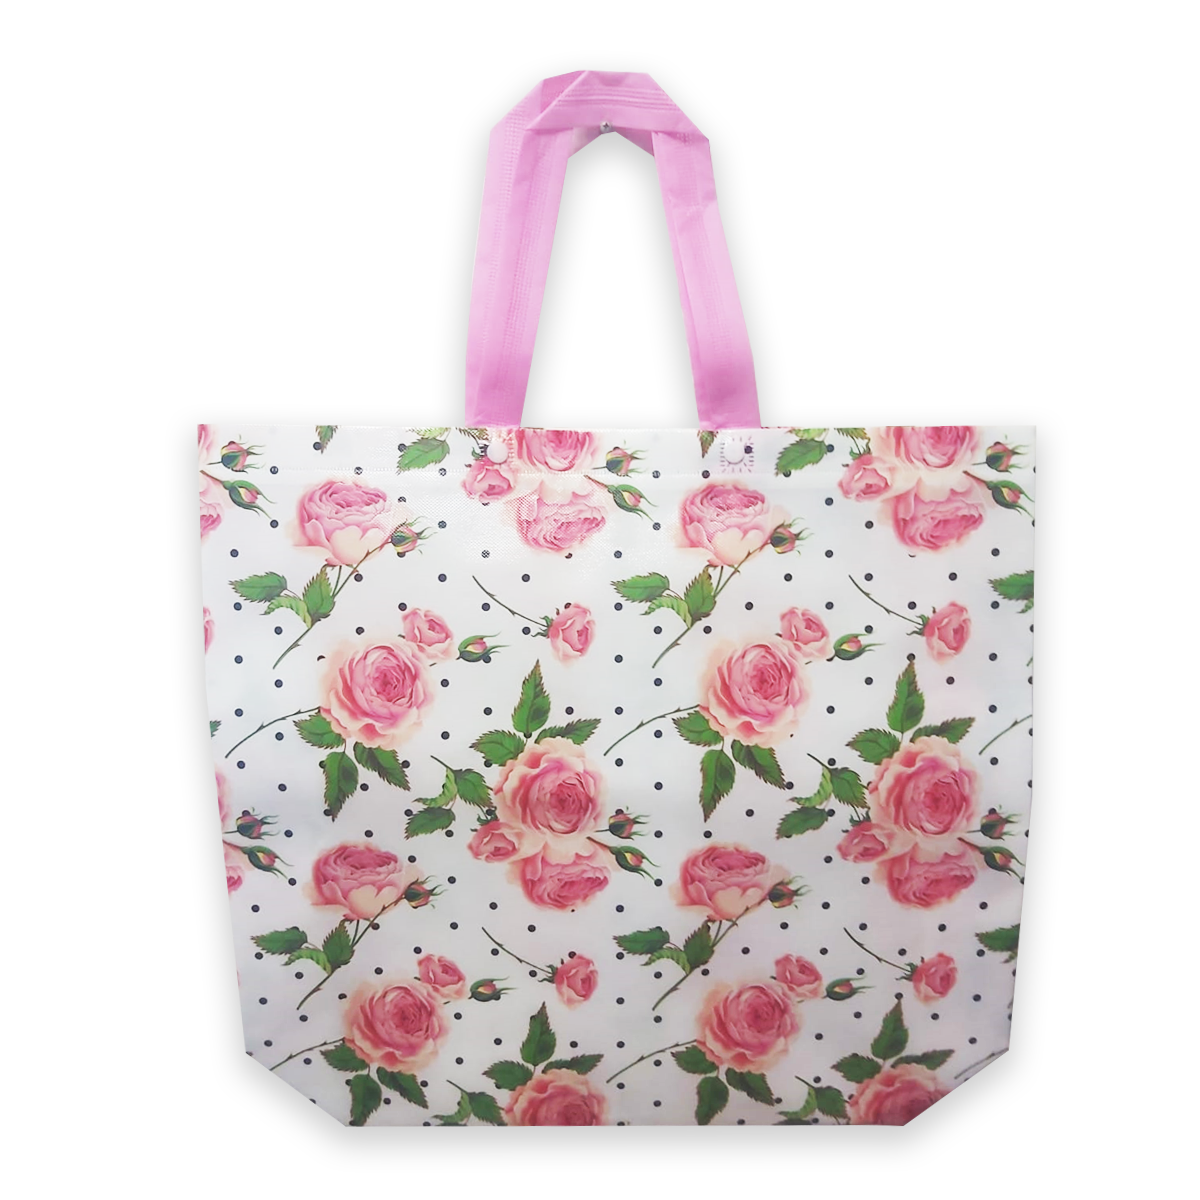 Set of 12 Floral Reusable RPET Grocery Tote Shopping Bags Heavy Duty & Water Resistant 48x46x12Cms - WILLOW